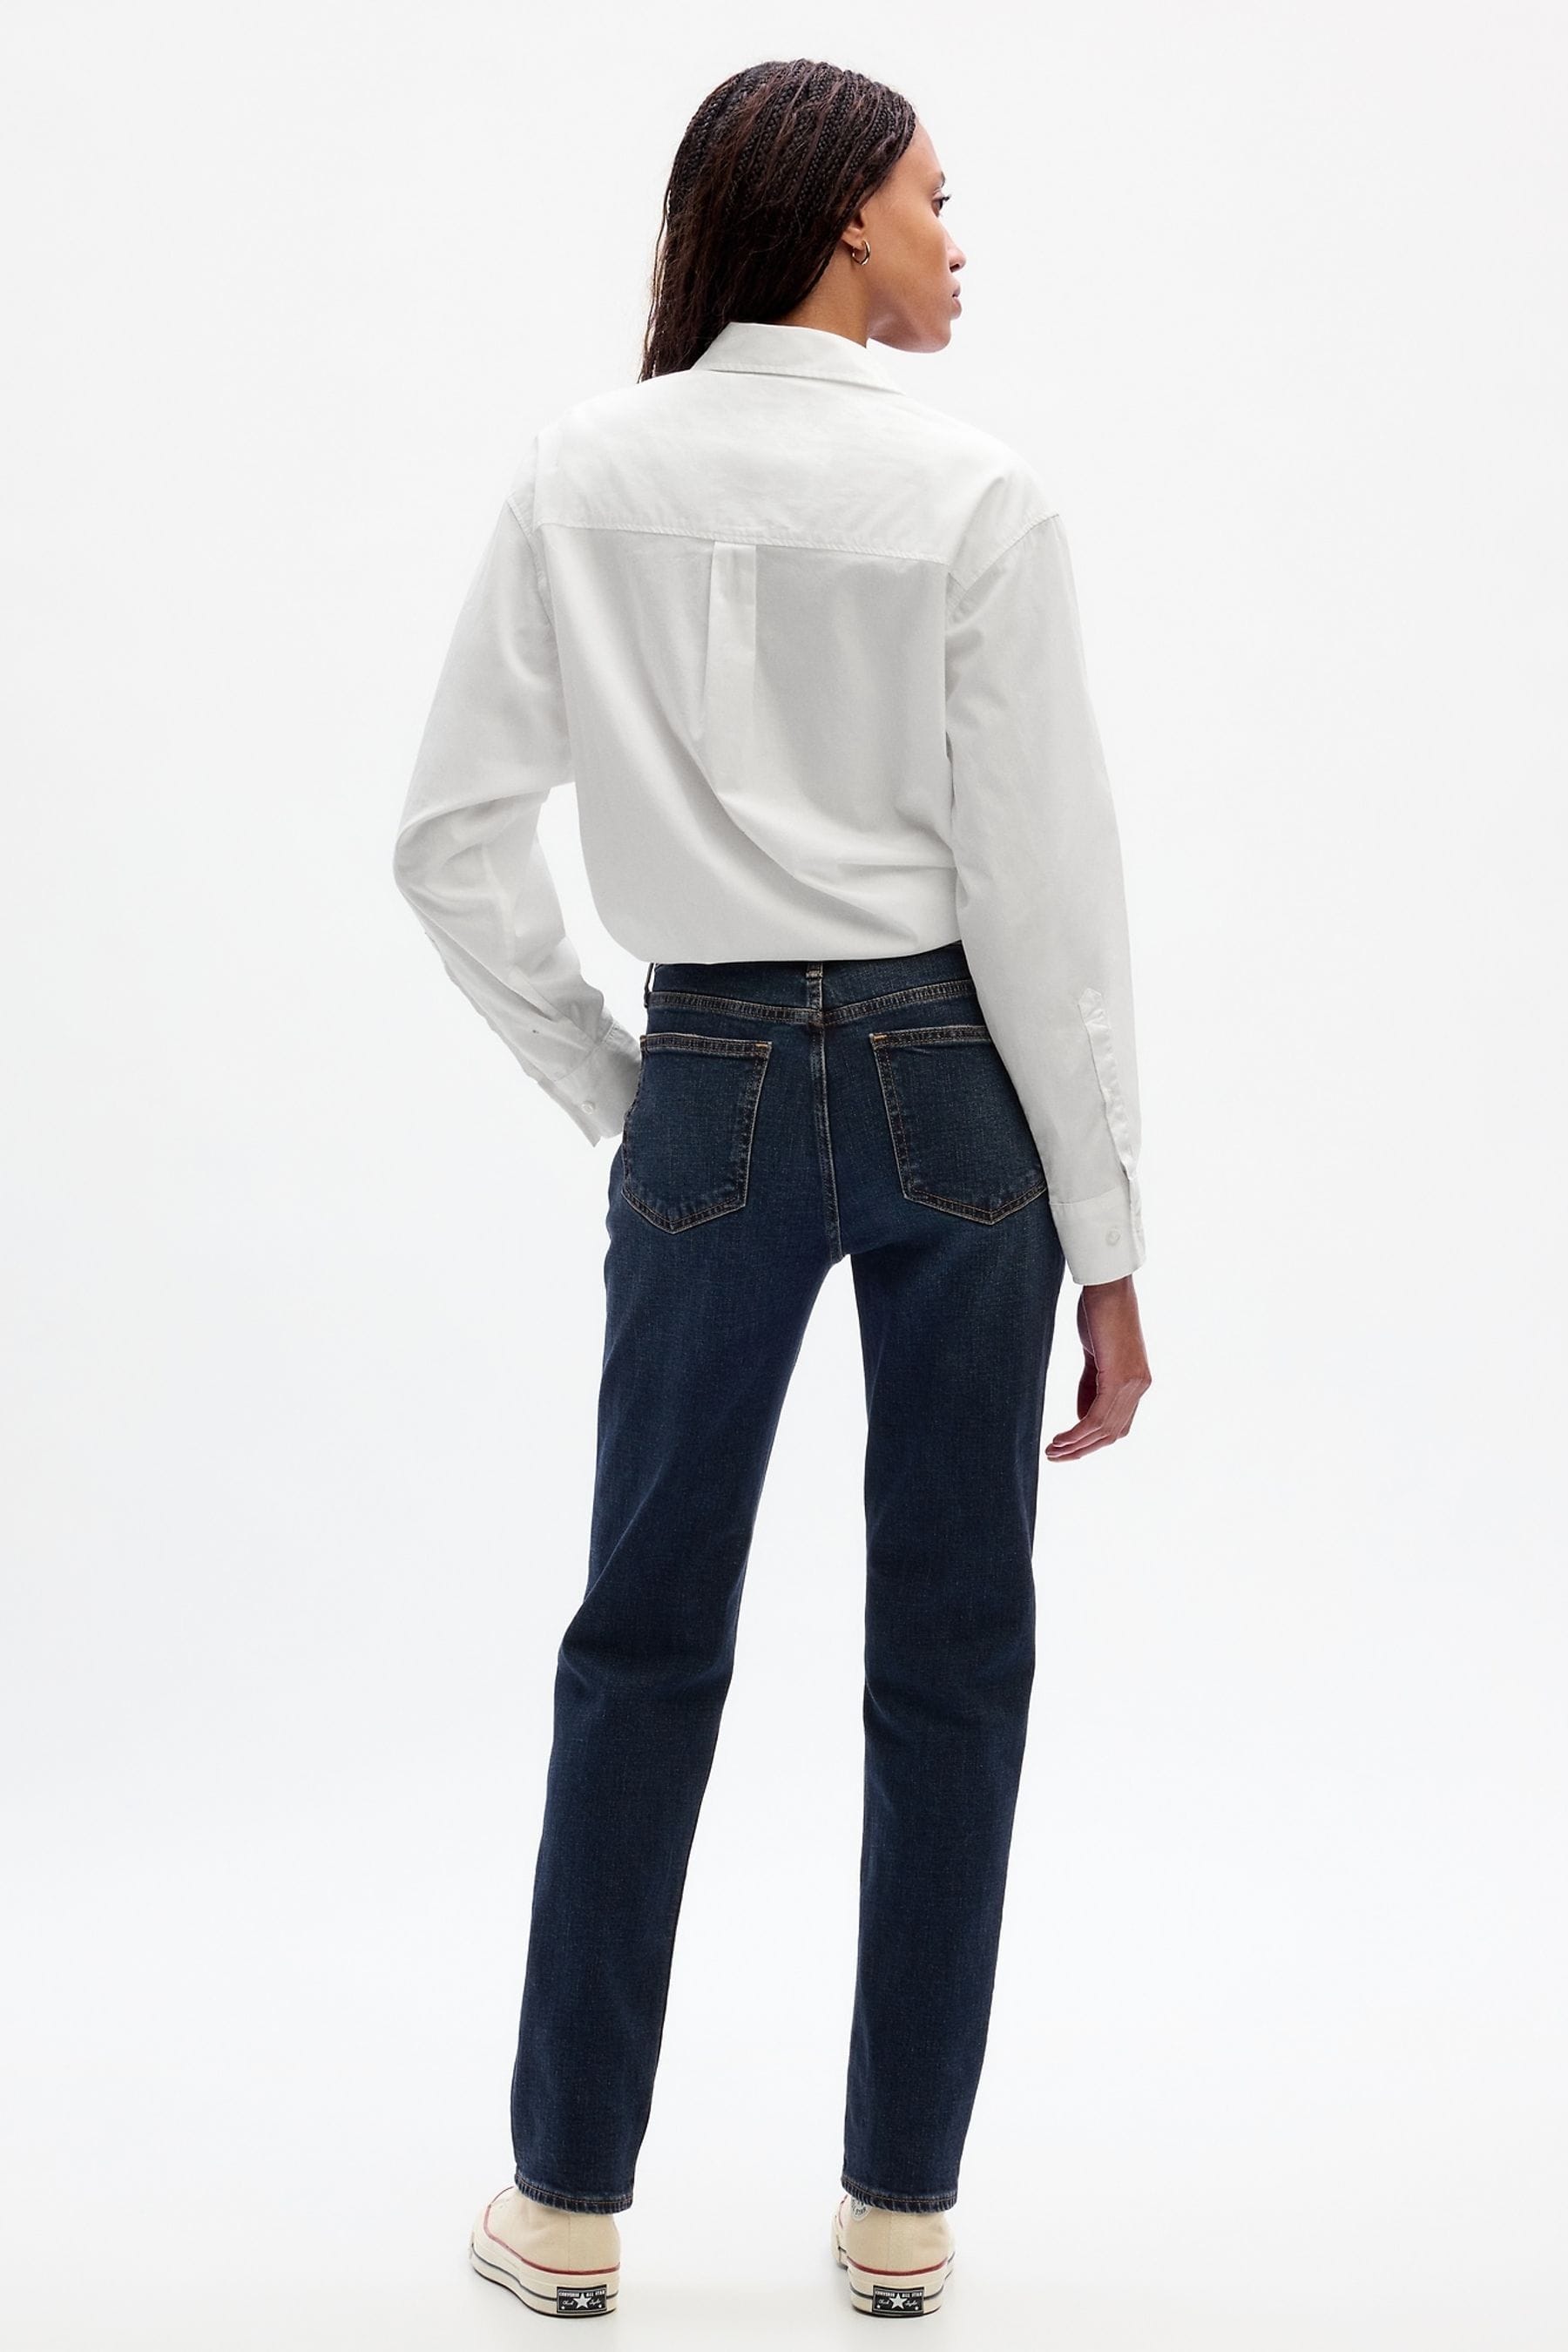 Buy Gap Mid Rise Girlfriend Jeans from the Next UK online shop